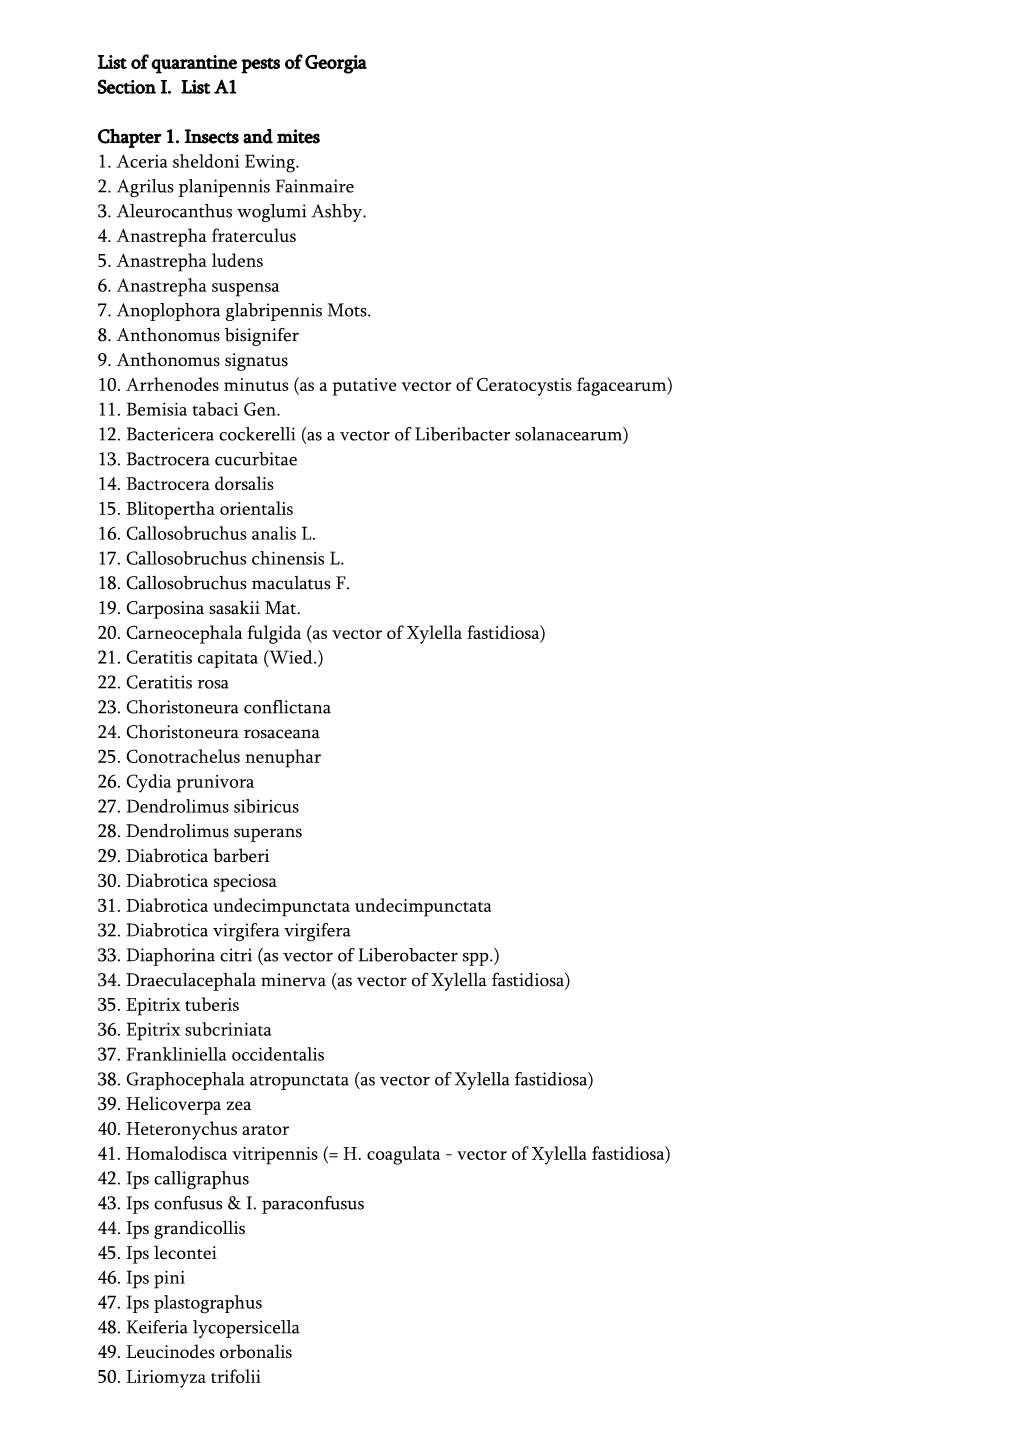 List of Quarantine Pests of Georgia Section I. List A1 Chapter 1. Insects